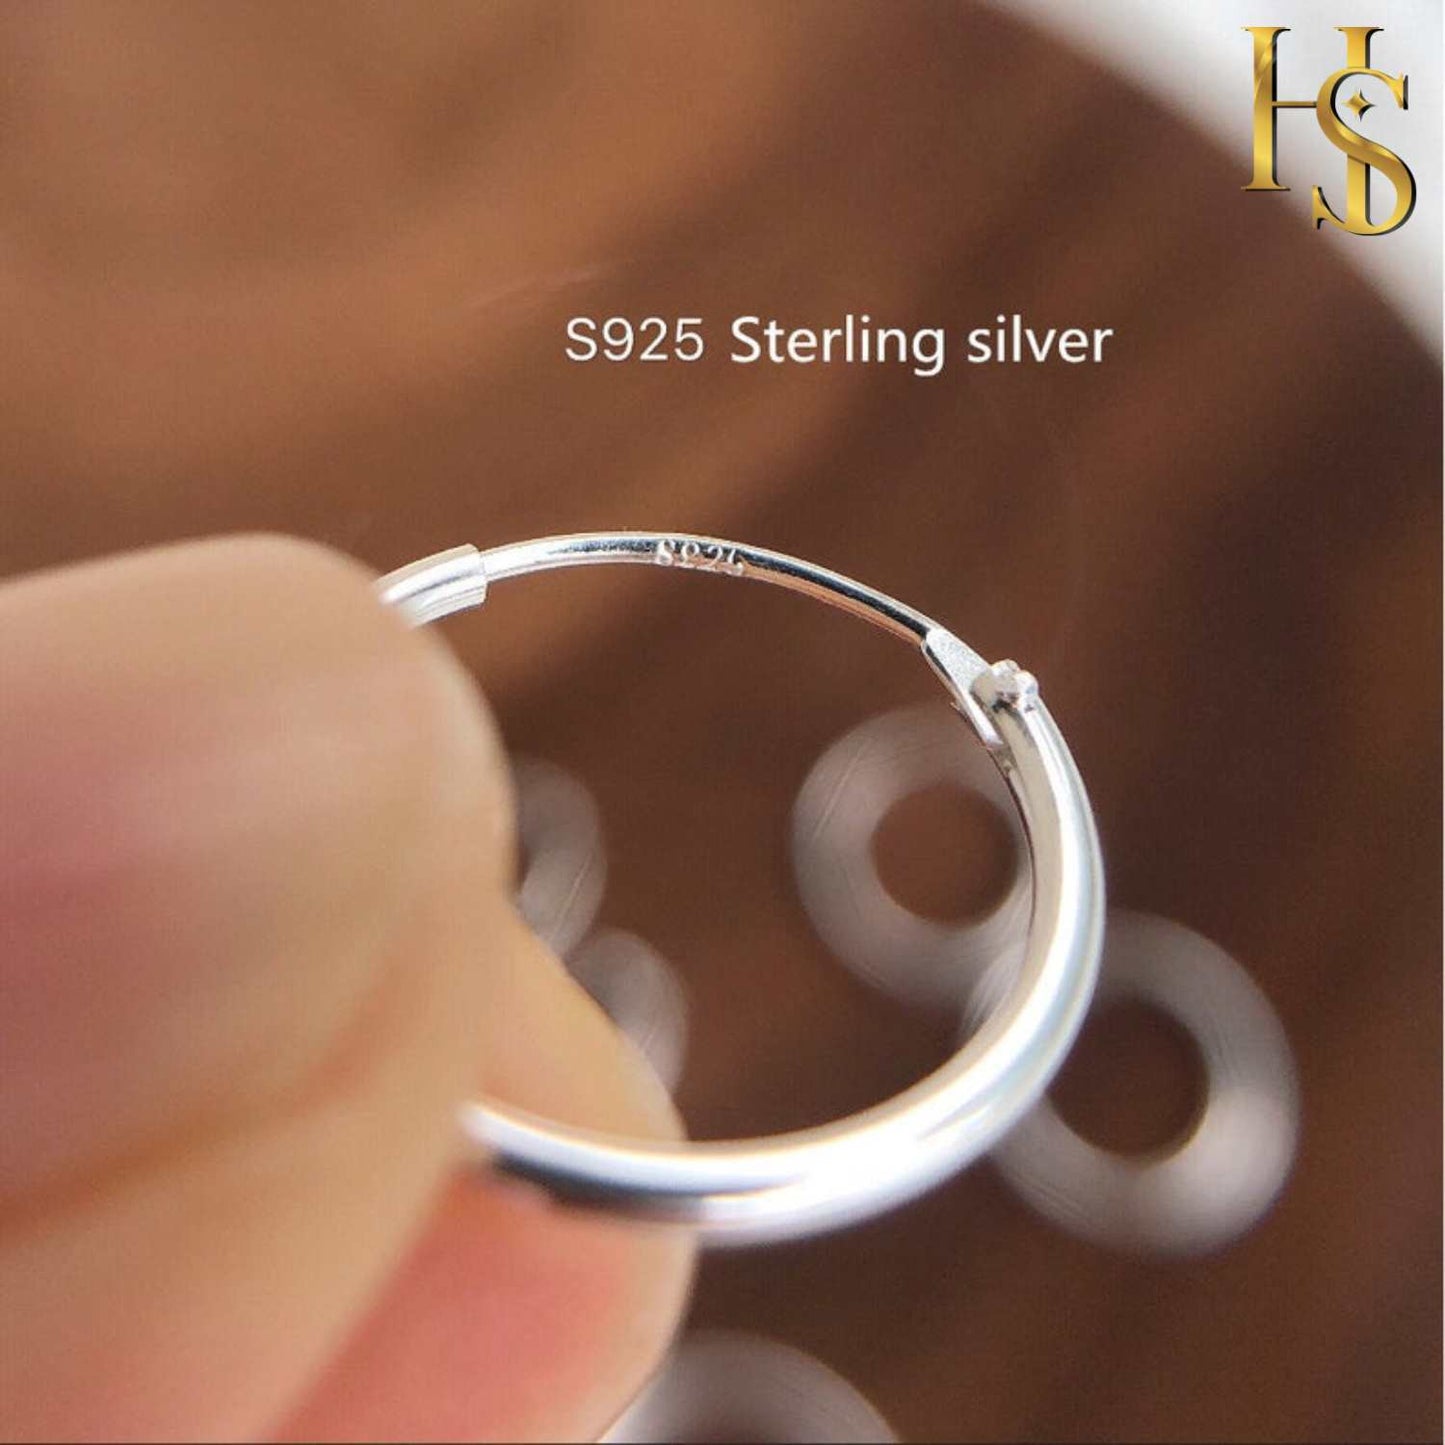 Classic Hoop Earrings in 92.5 Sterling Silver - 1.2mm Thickness - Small Sizes 10mm to 20mm